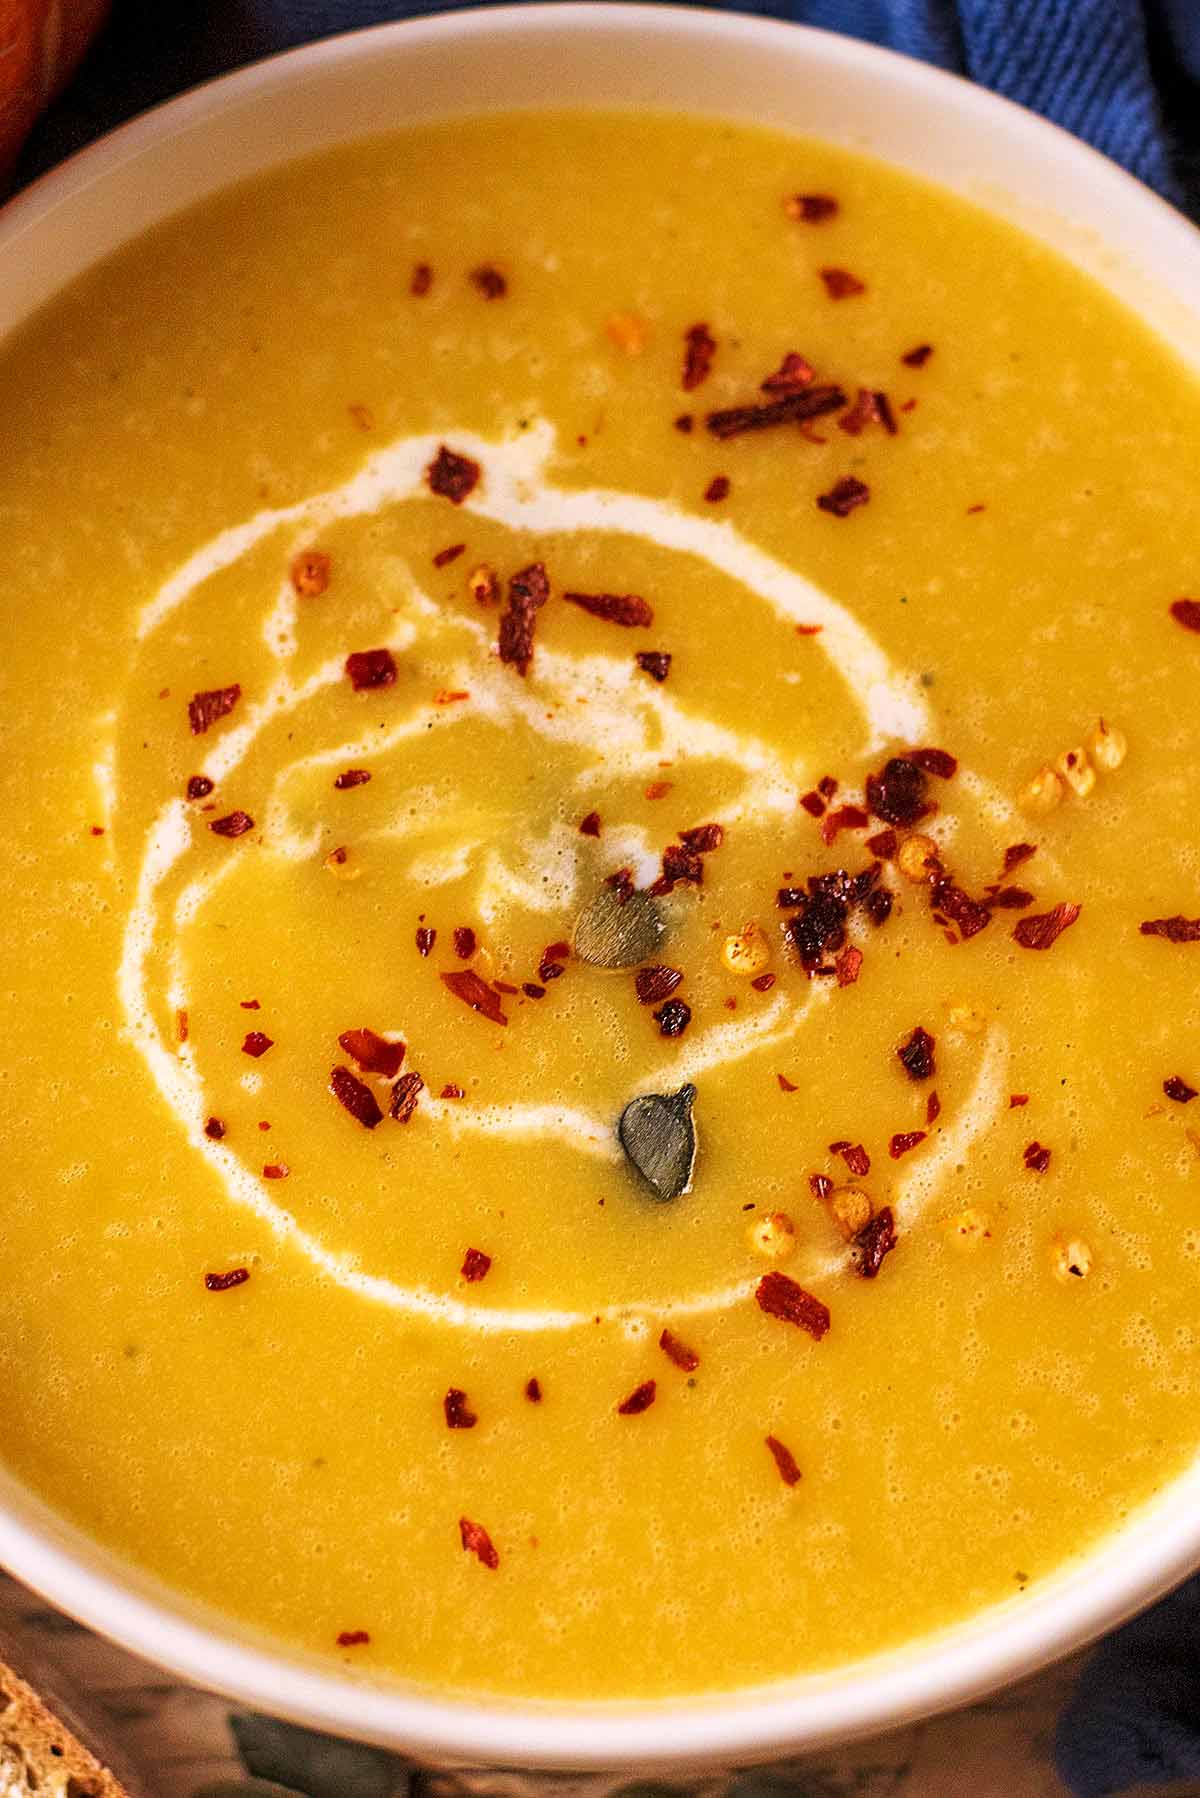 Pumpkin seeds, chilli flakes and a drizzle of cream on top of pumpkin soup.